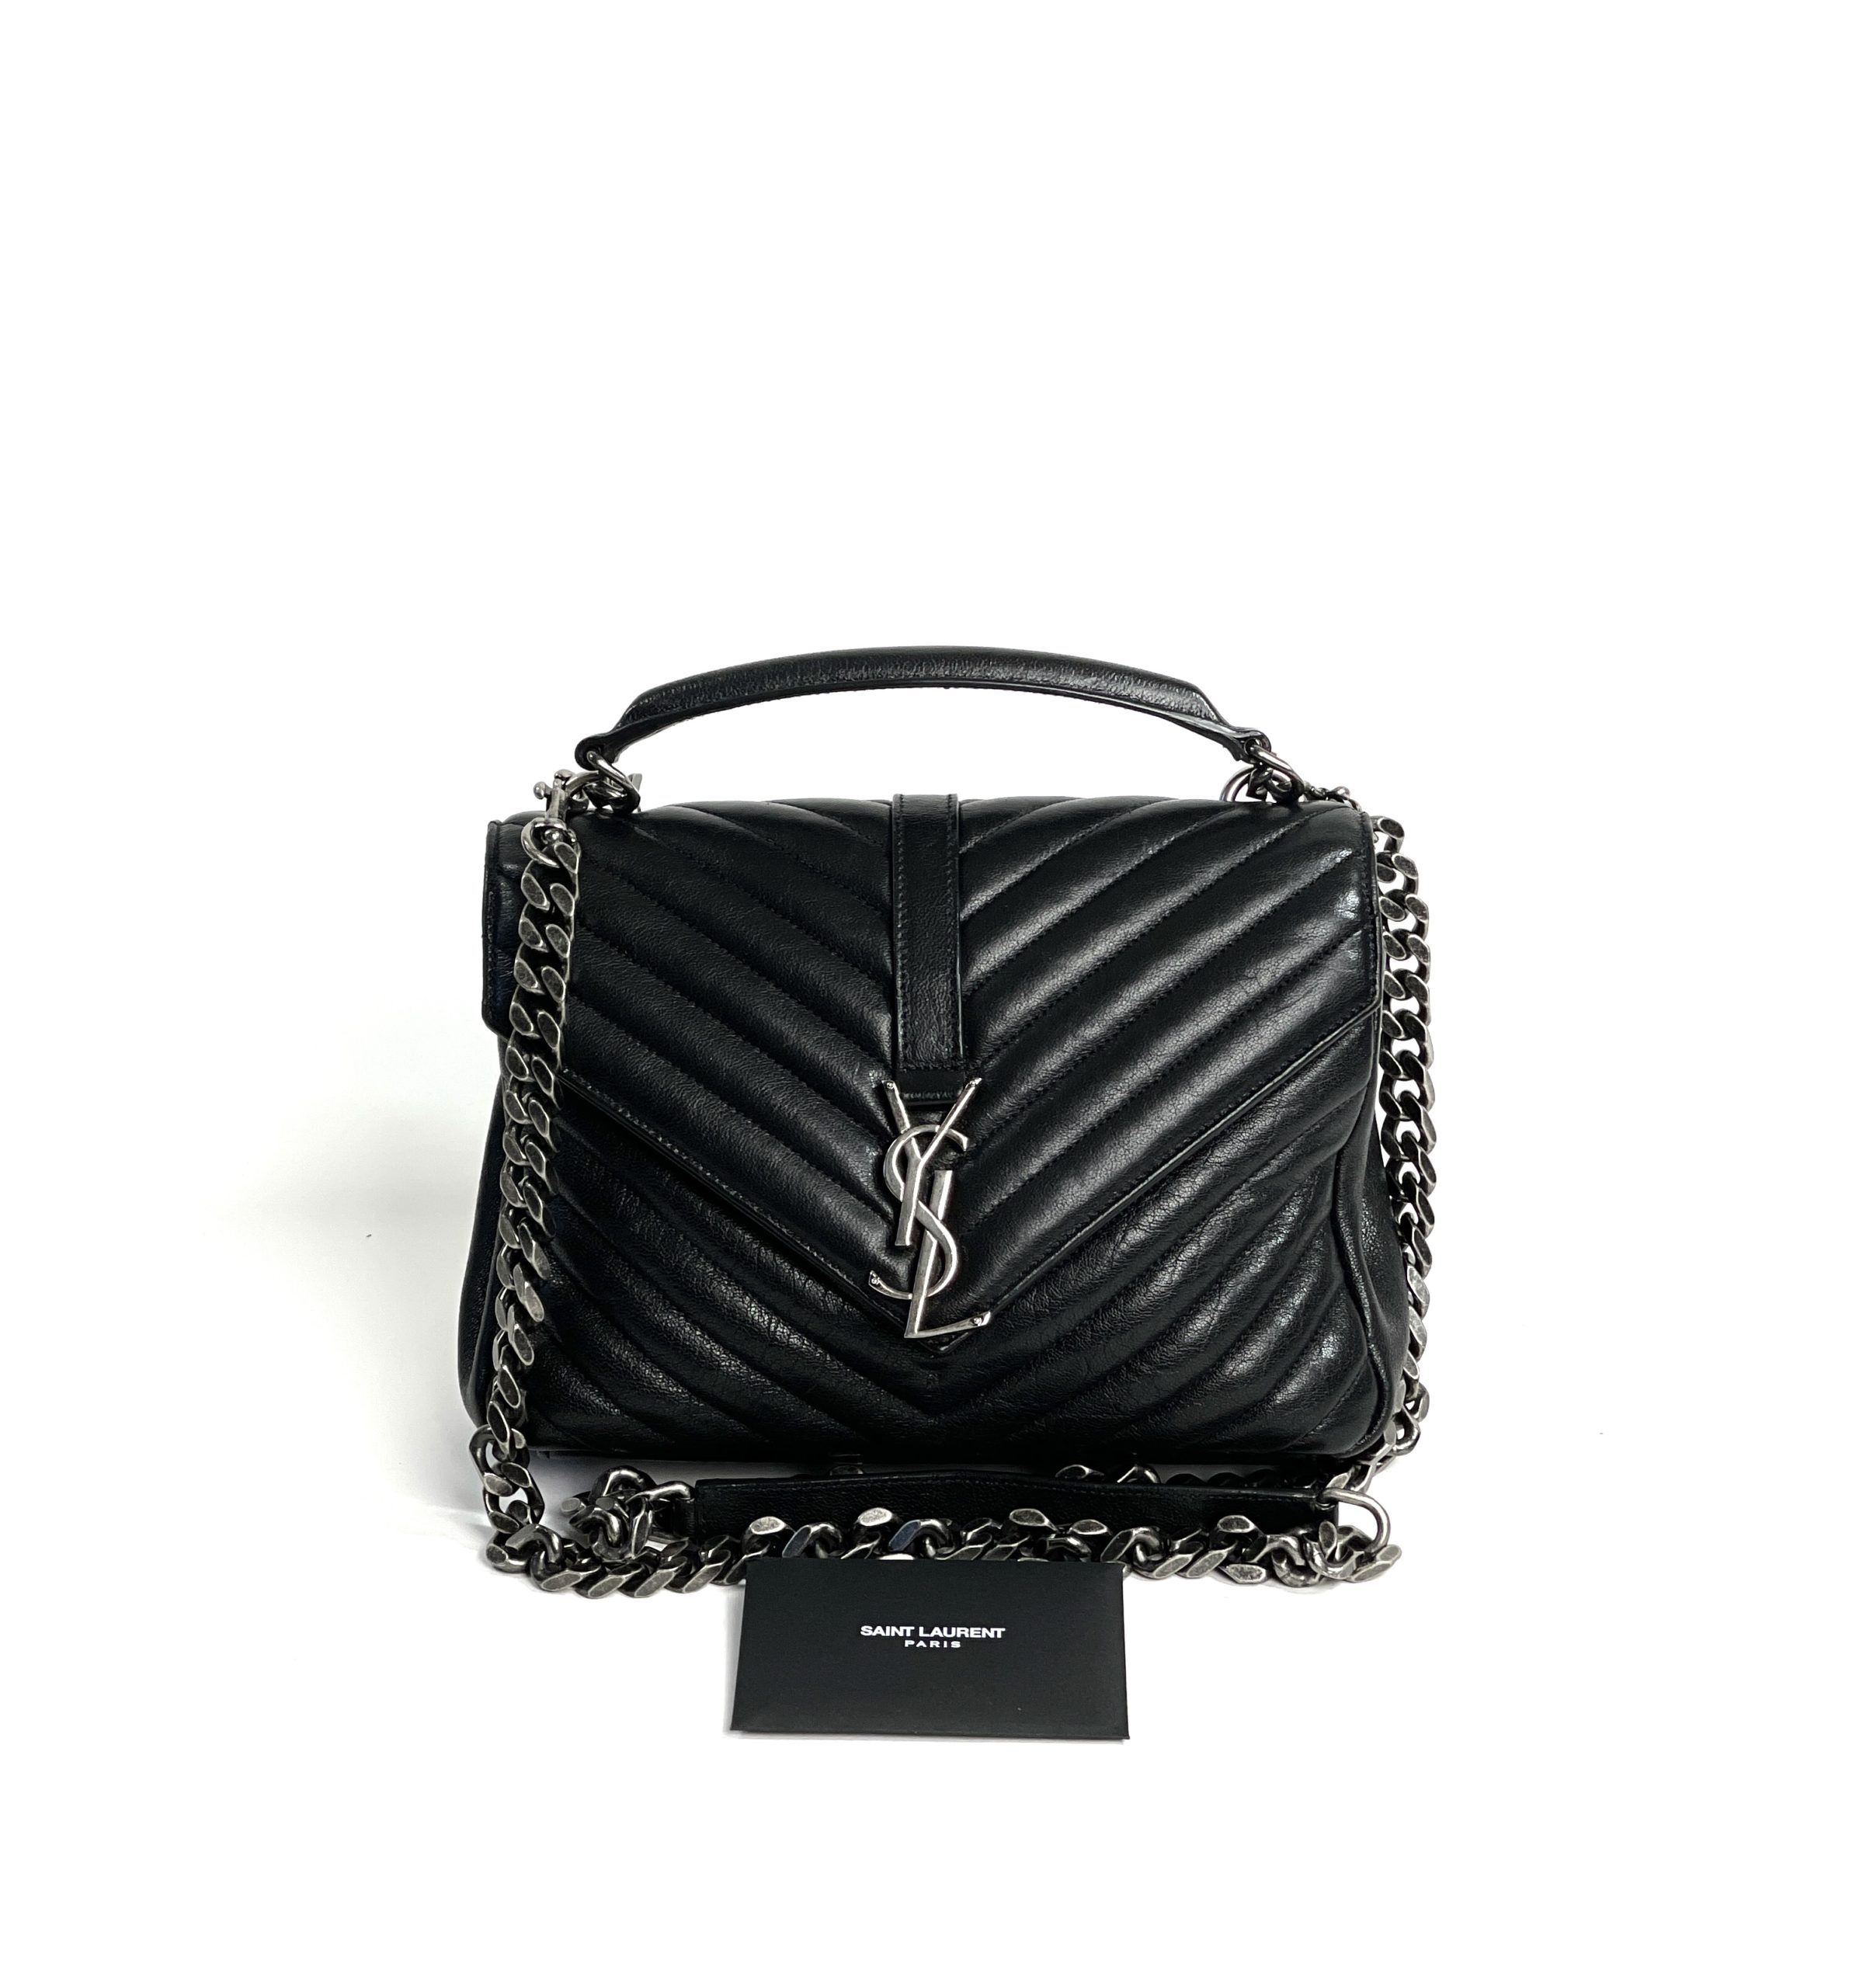 Saint Laurent black / silver 2022 Quilted Matelasse Leather YSL